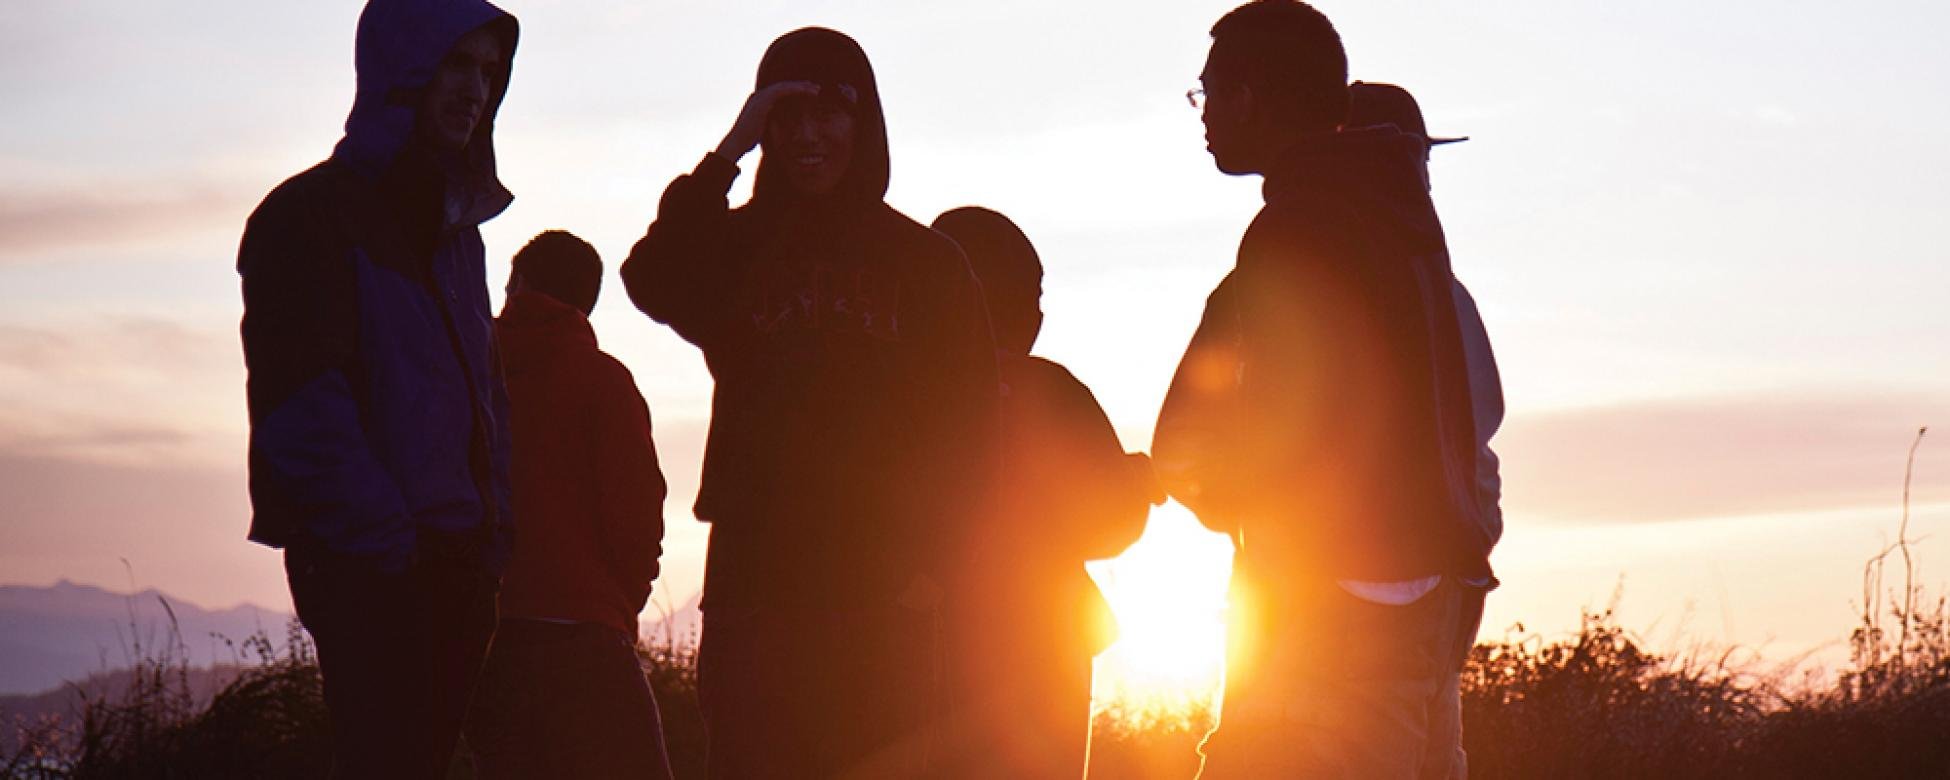 students stand in front of the sunrise in track suits and workout gear